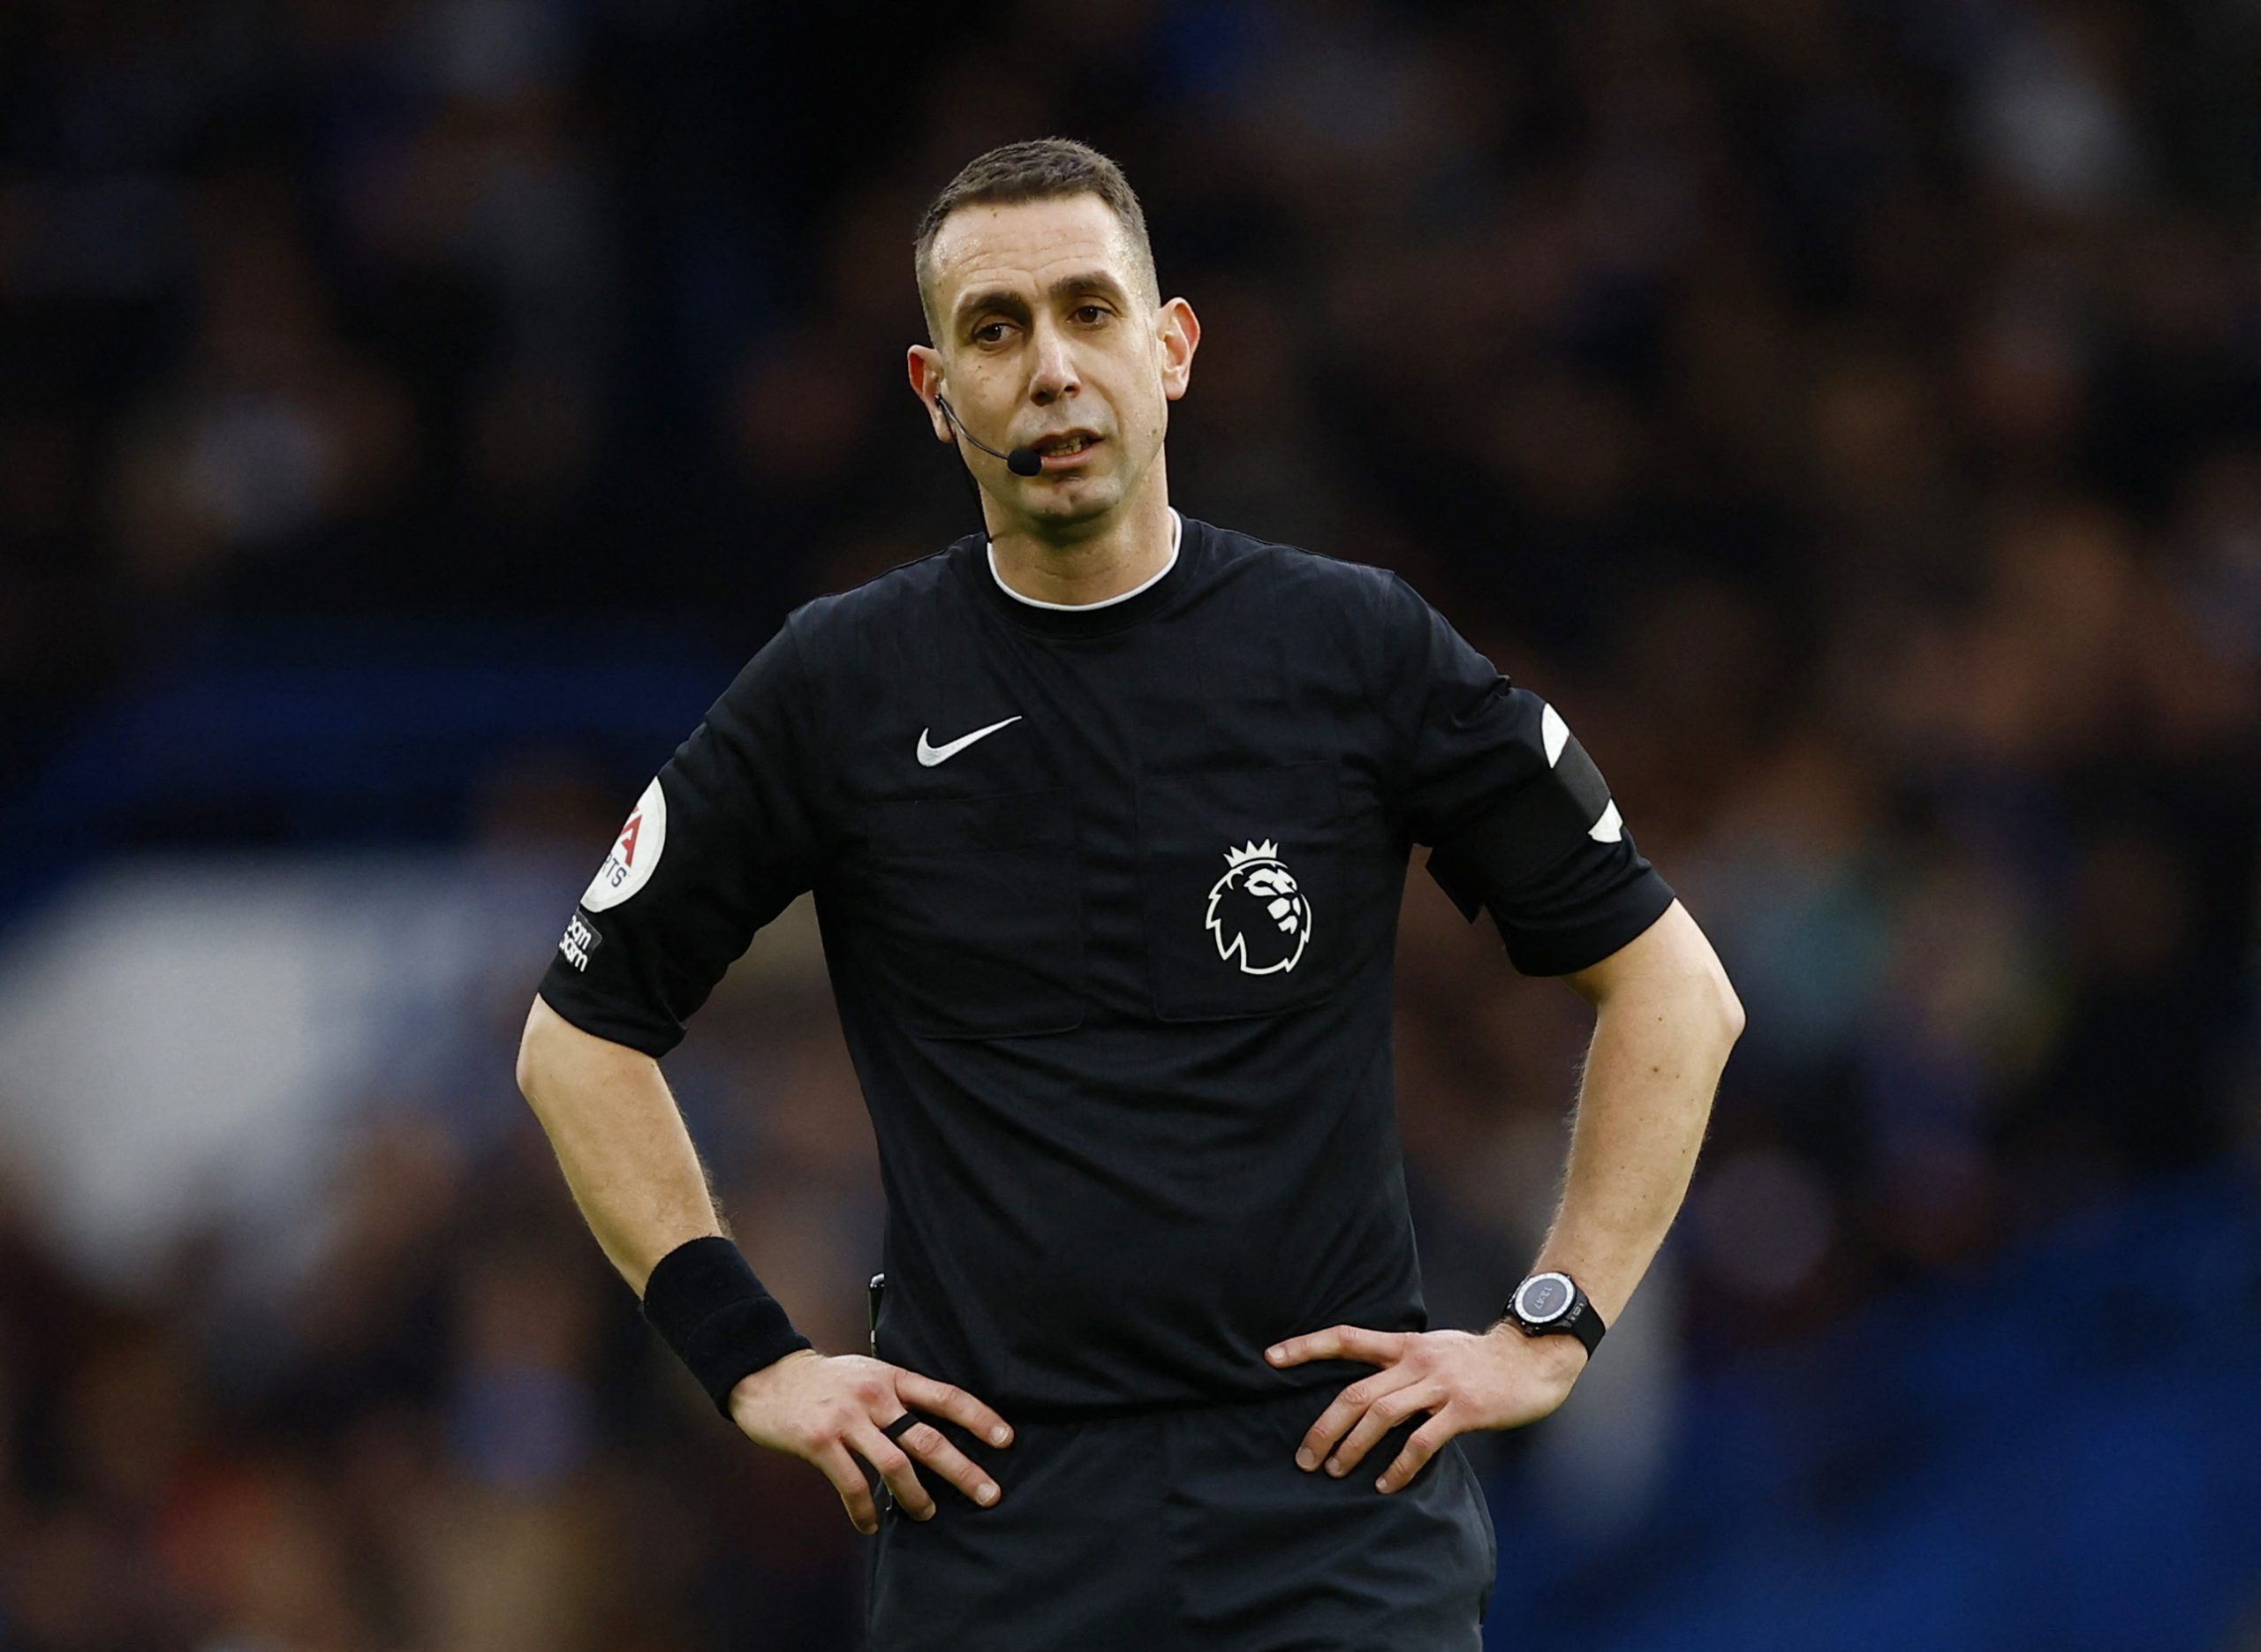 Soccer Football - Premier League - Chelsea v Southampton - Stamford Bridge, London, Britain - February 18, 2023 Referee David Coote Action Images via Reuters/Andrew Boyers EDITORIAL USE ONLY. No use with unauthorized audio, video, data, fixture lists, club/league logos or 'live' services. Online in-match use limited to 75 images, no video emulation. No use in betting, games or single club /league/player publications.  Please contact your account representative for further details.